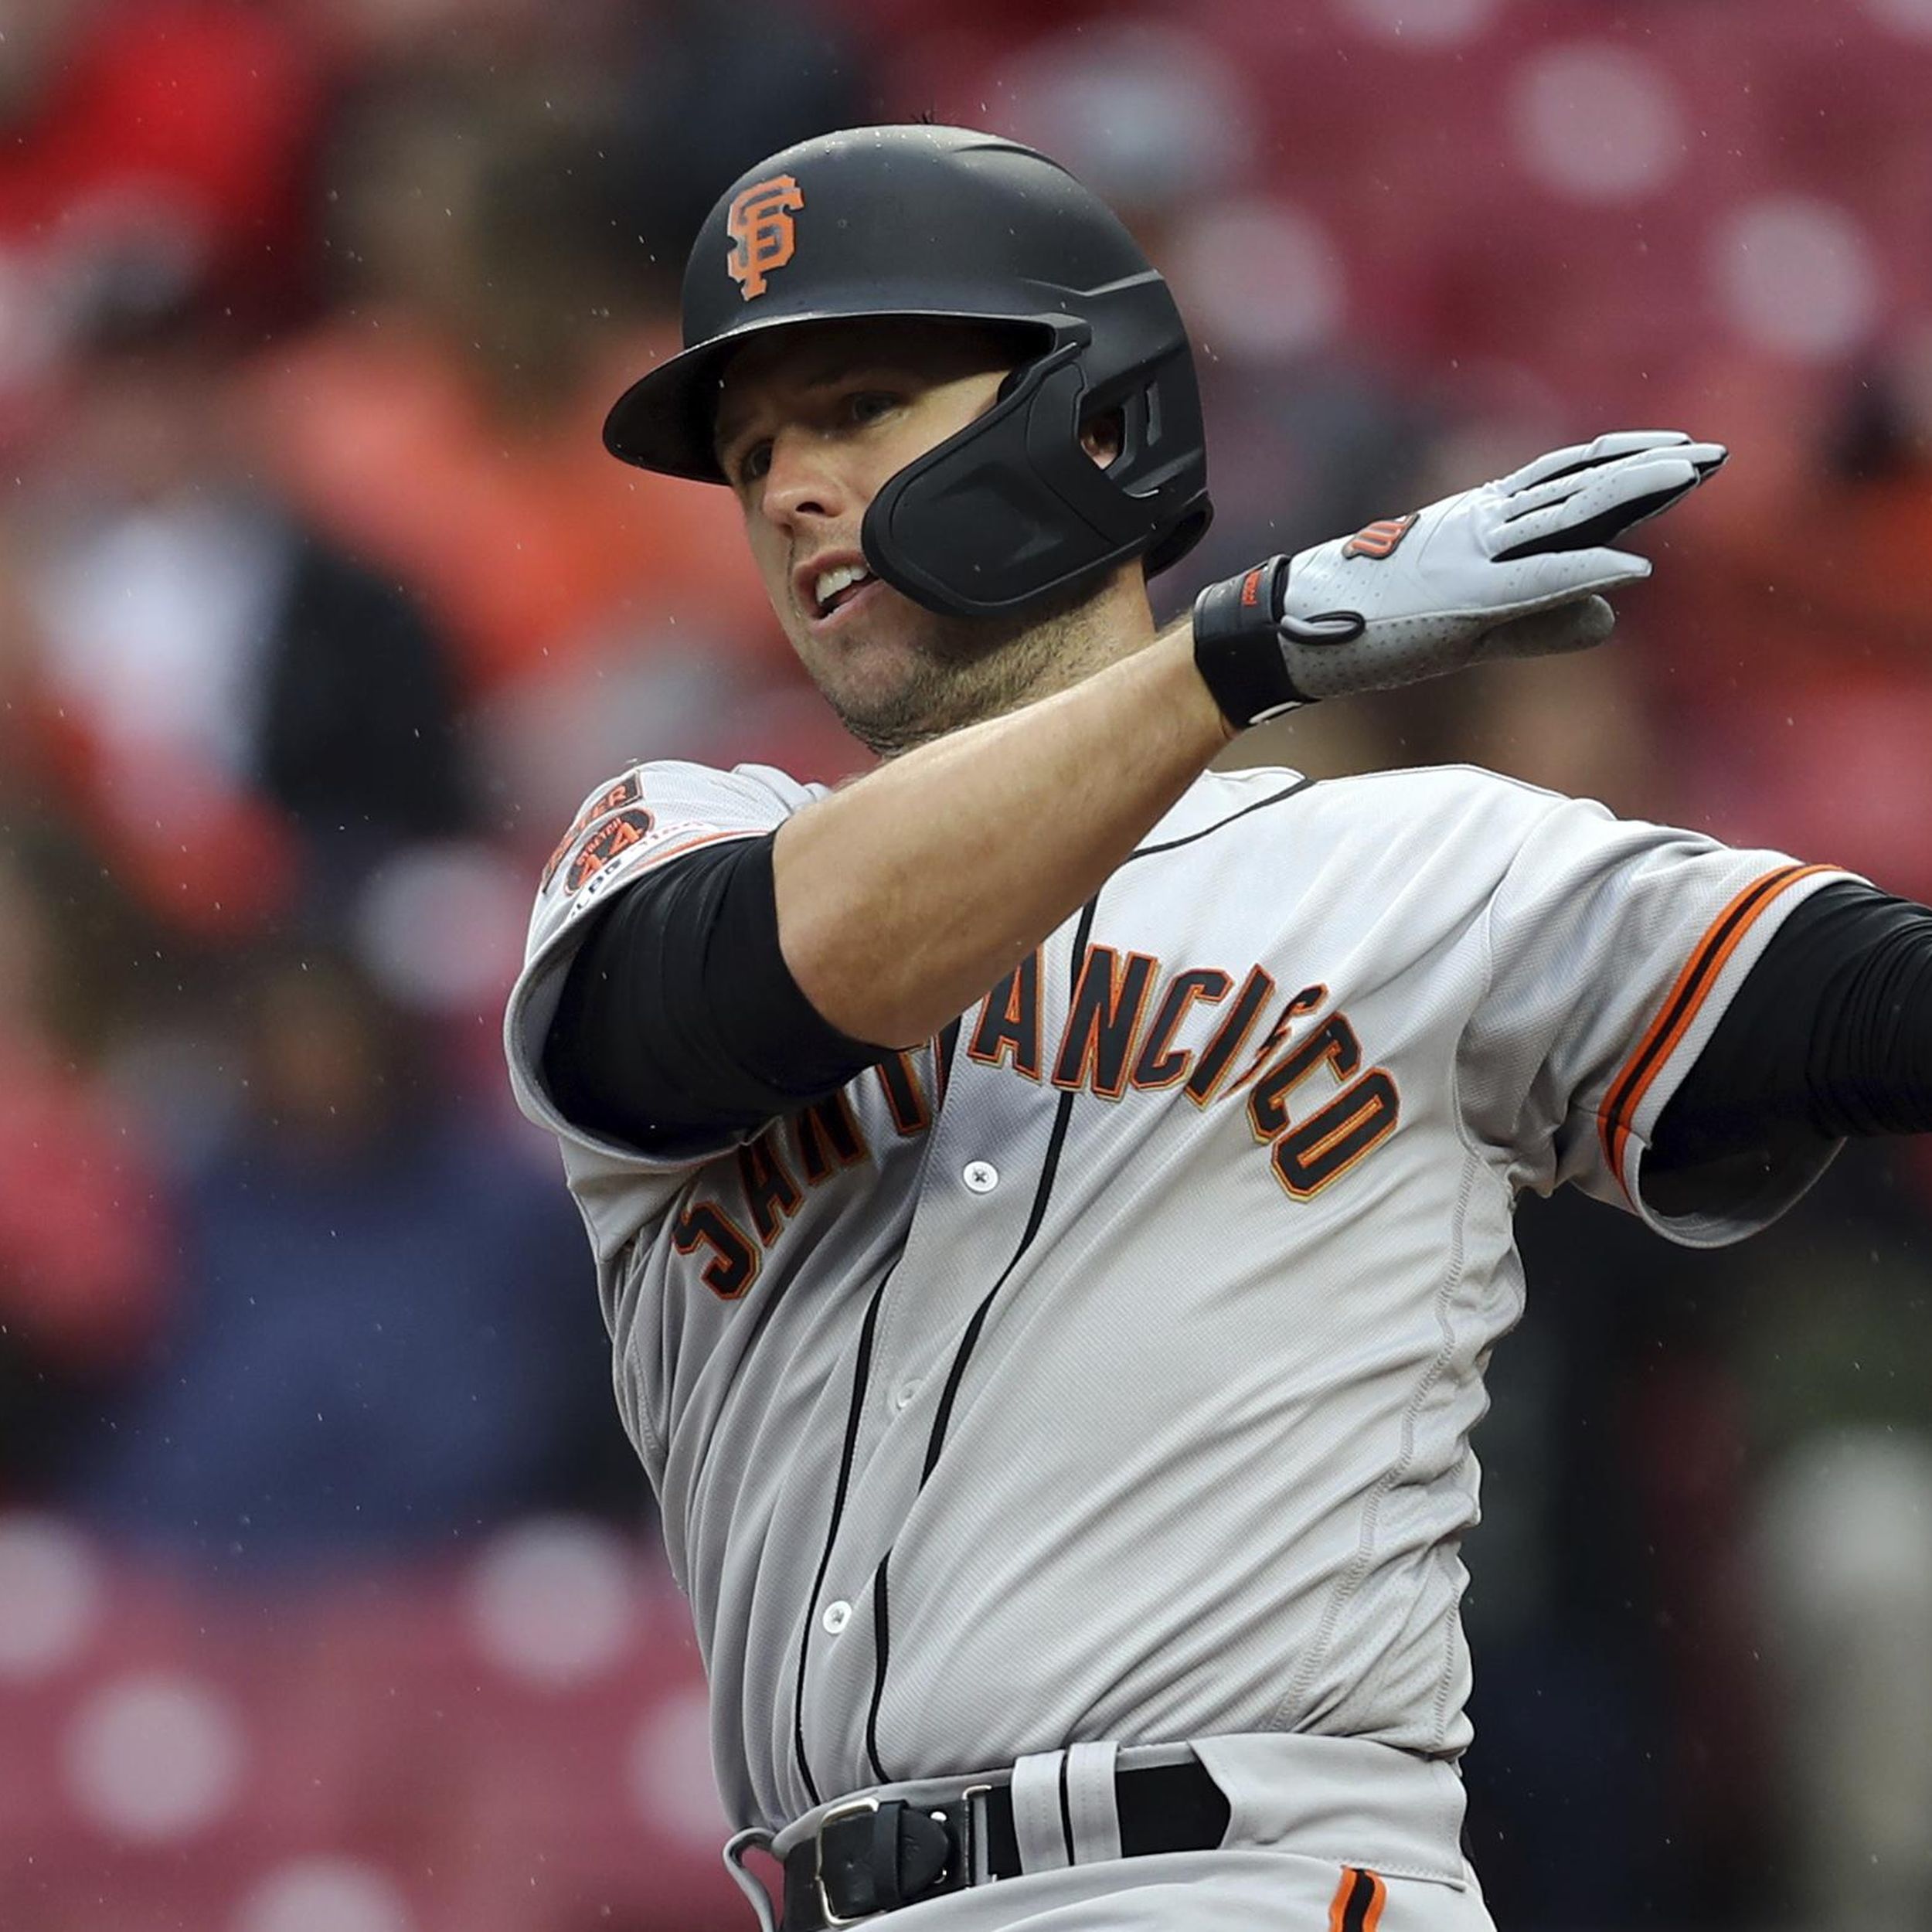 Giants place Buster Posey on 7-day concussion DL